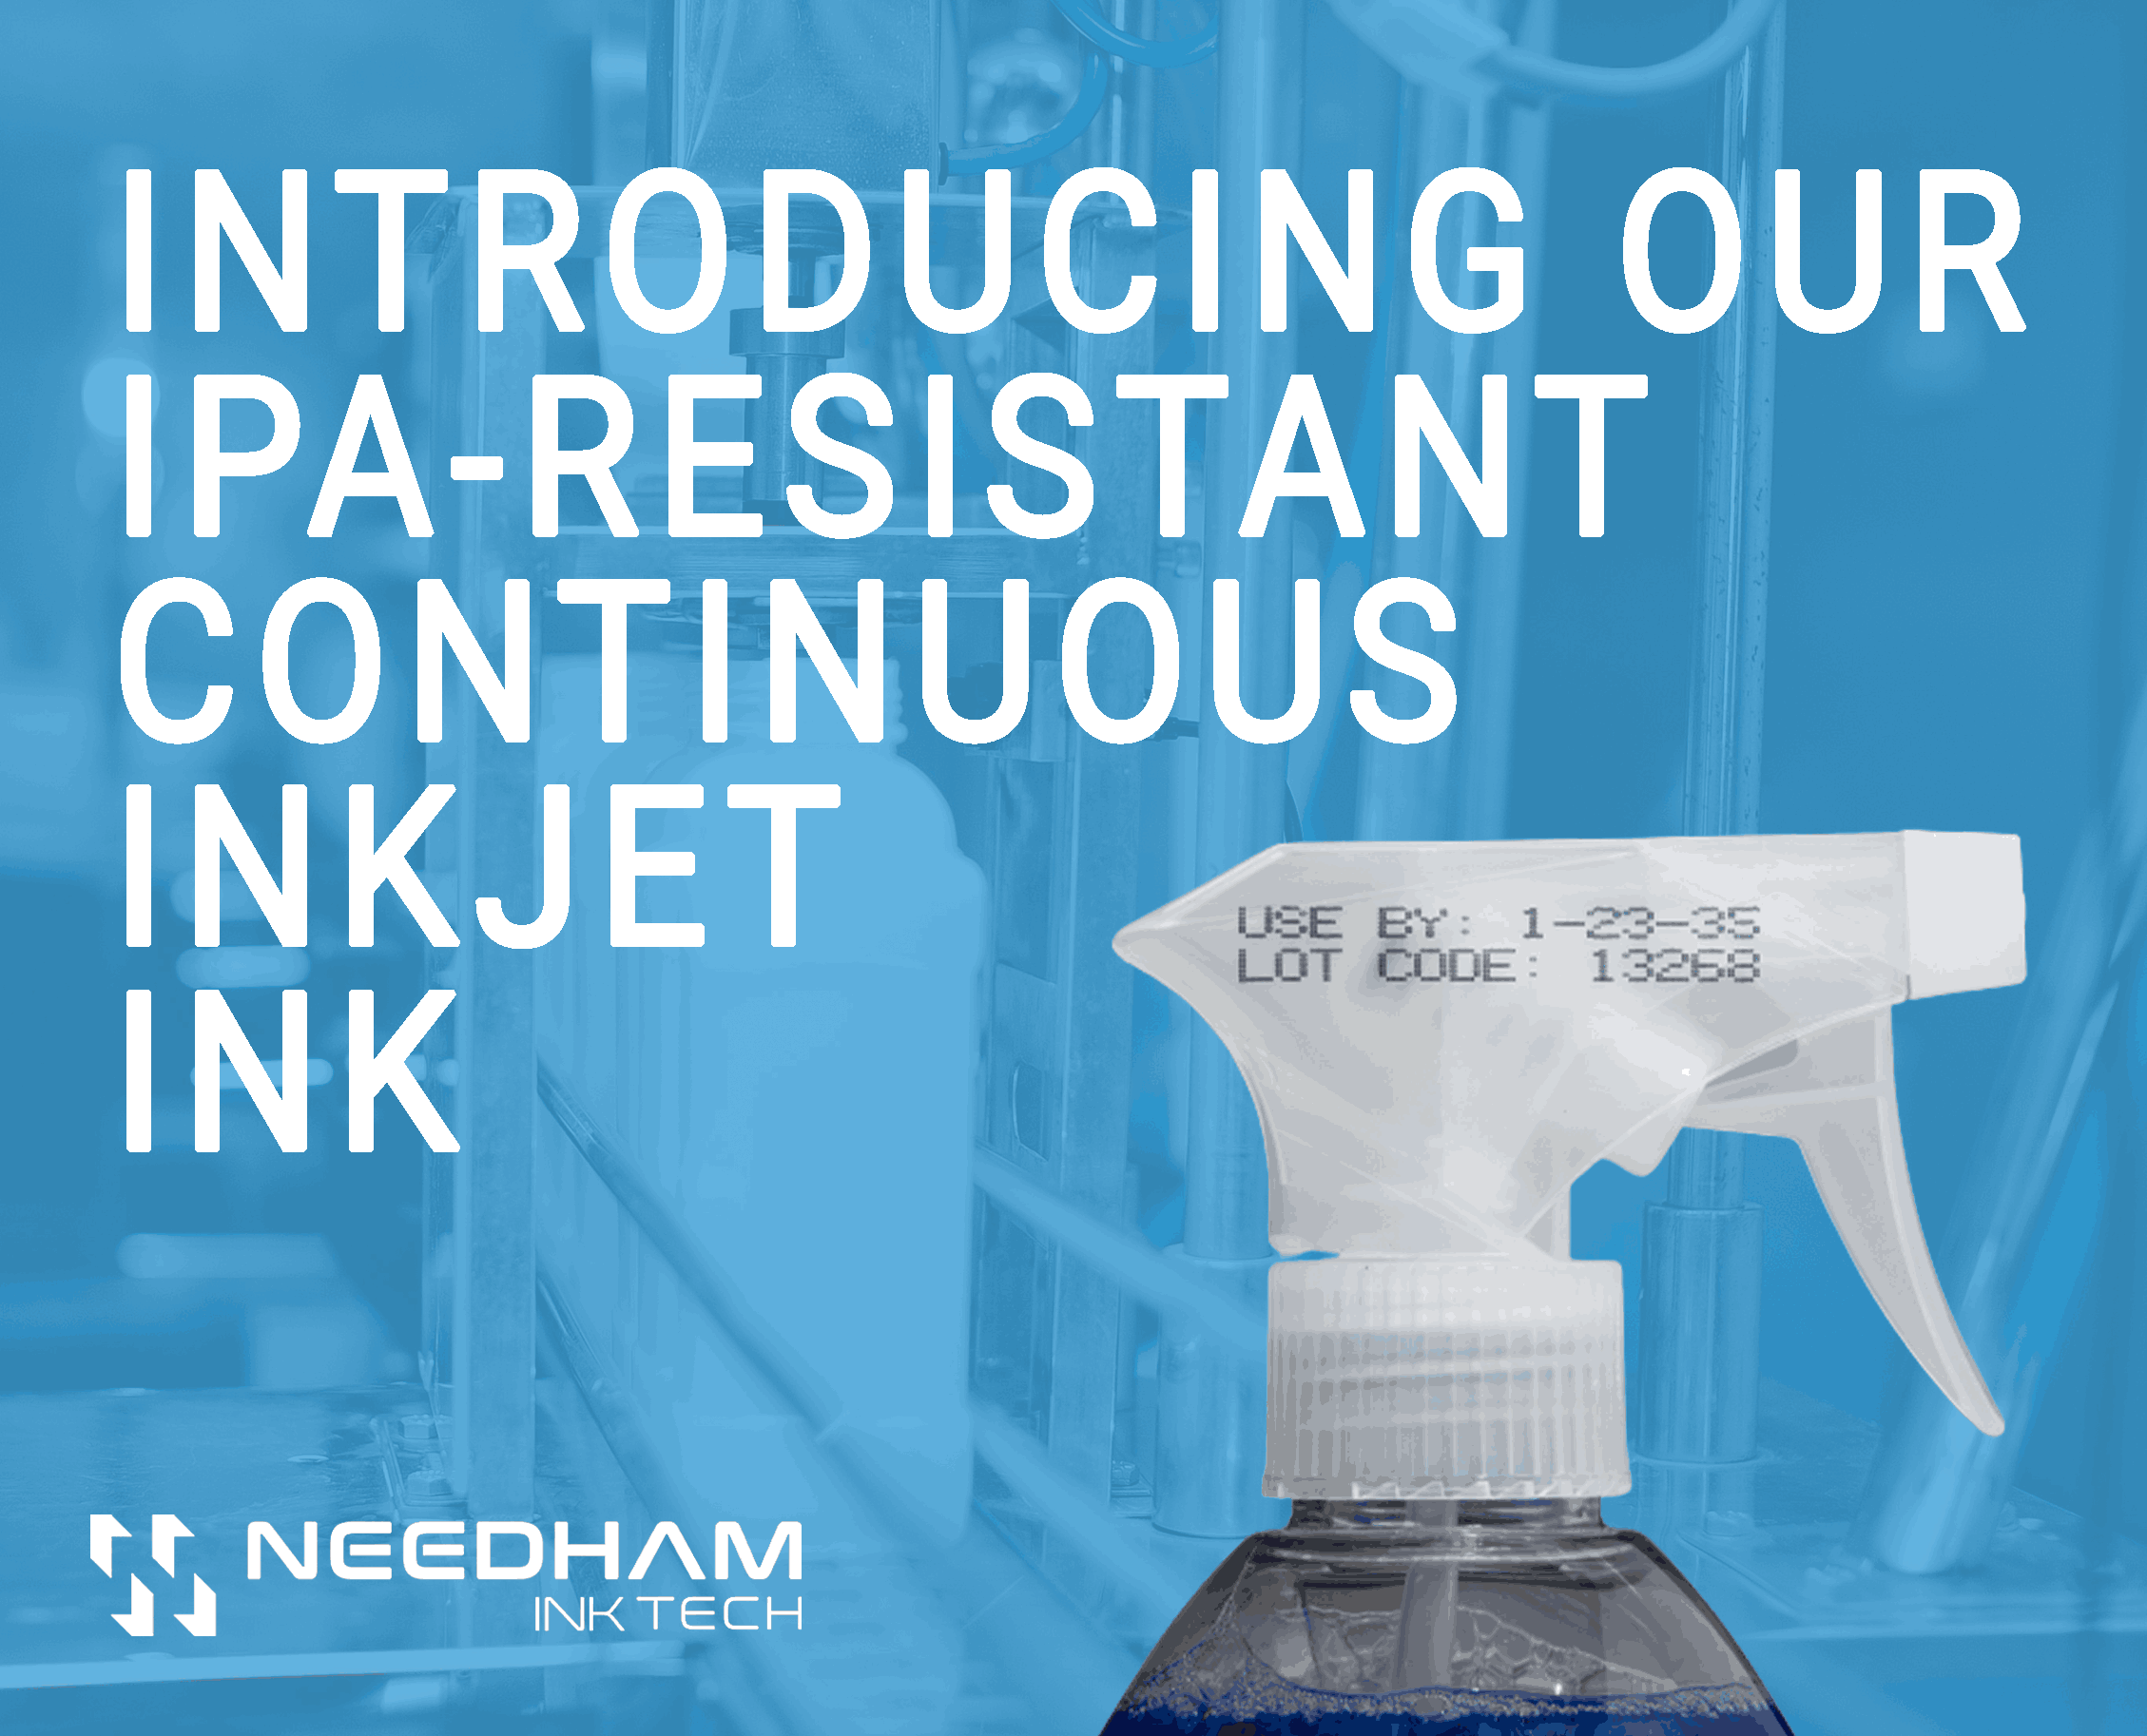 Needham Ink Tech Launches IPA-Resistant Continuous Inkjet Ink